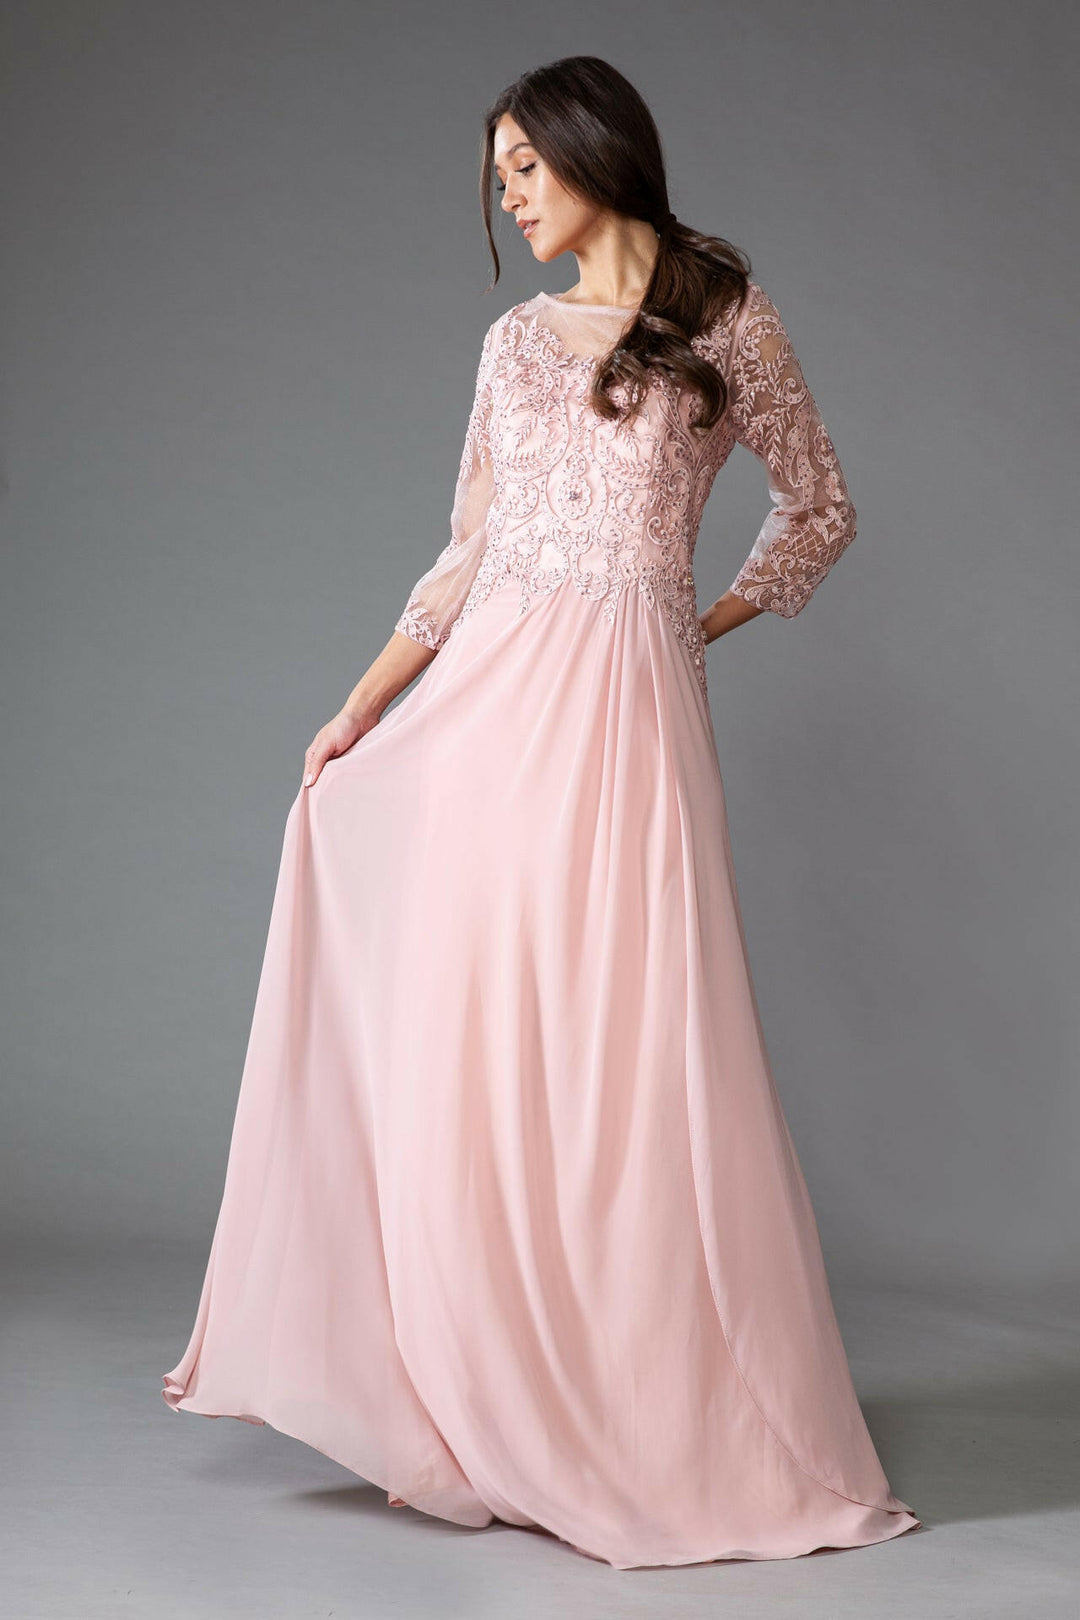 Sheer Sleeves Embroidered Lace Bodice Long Mother Of The Bride Dress AC7043-2